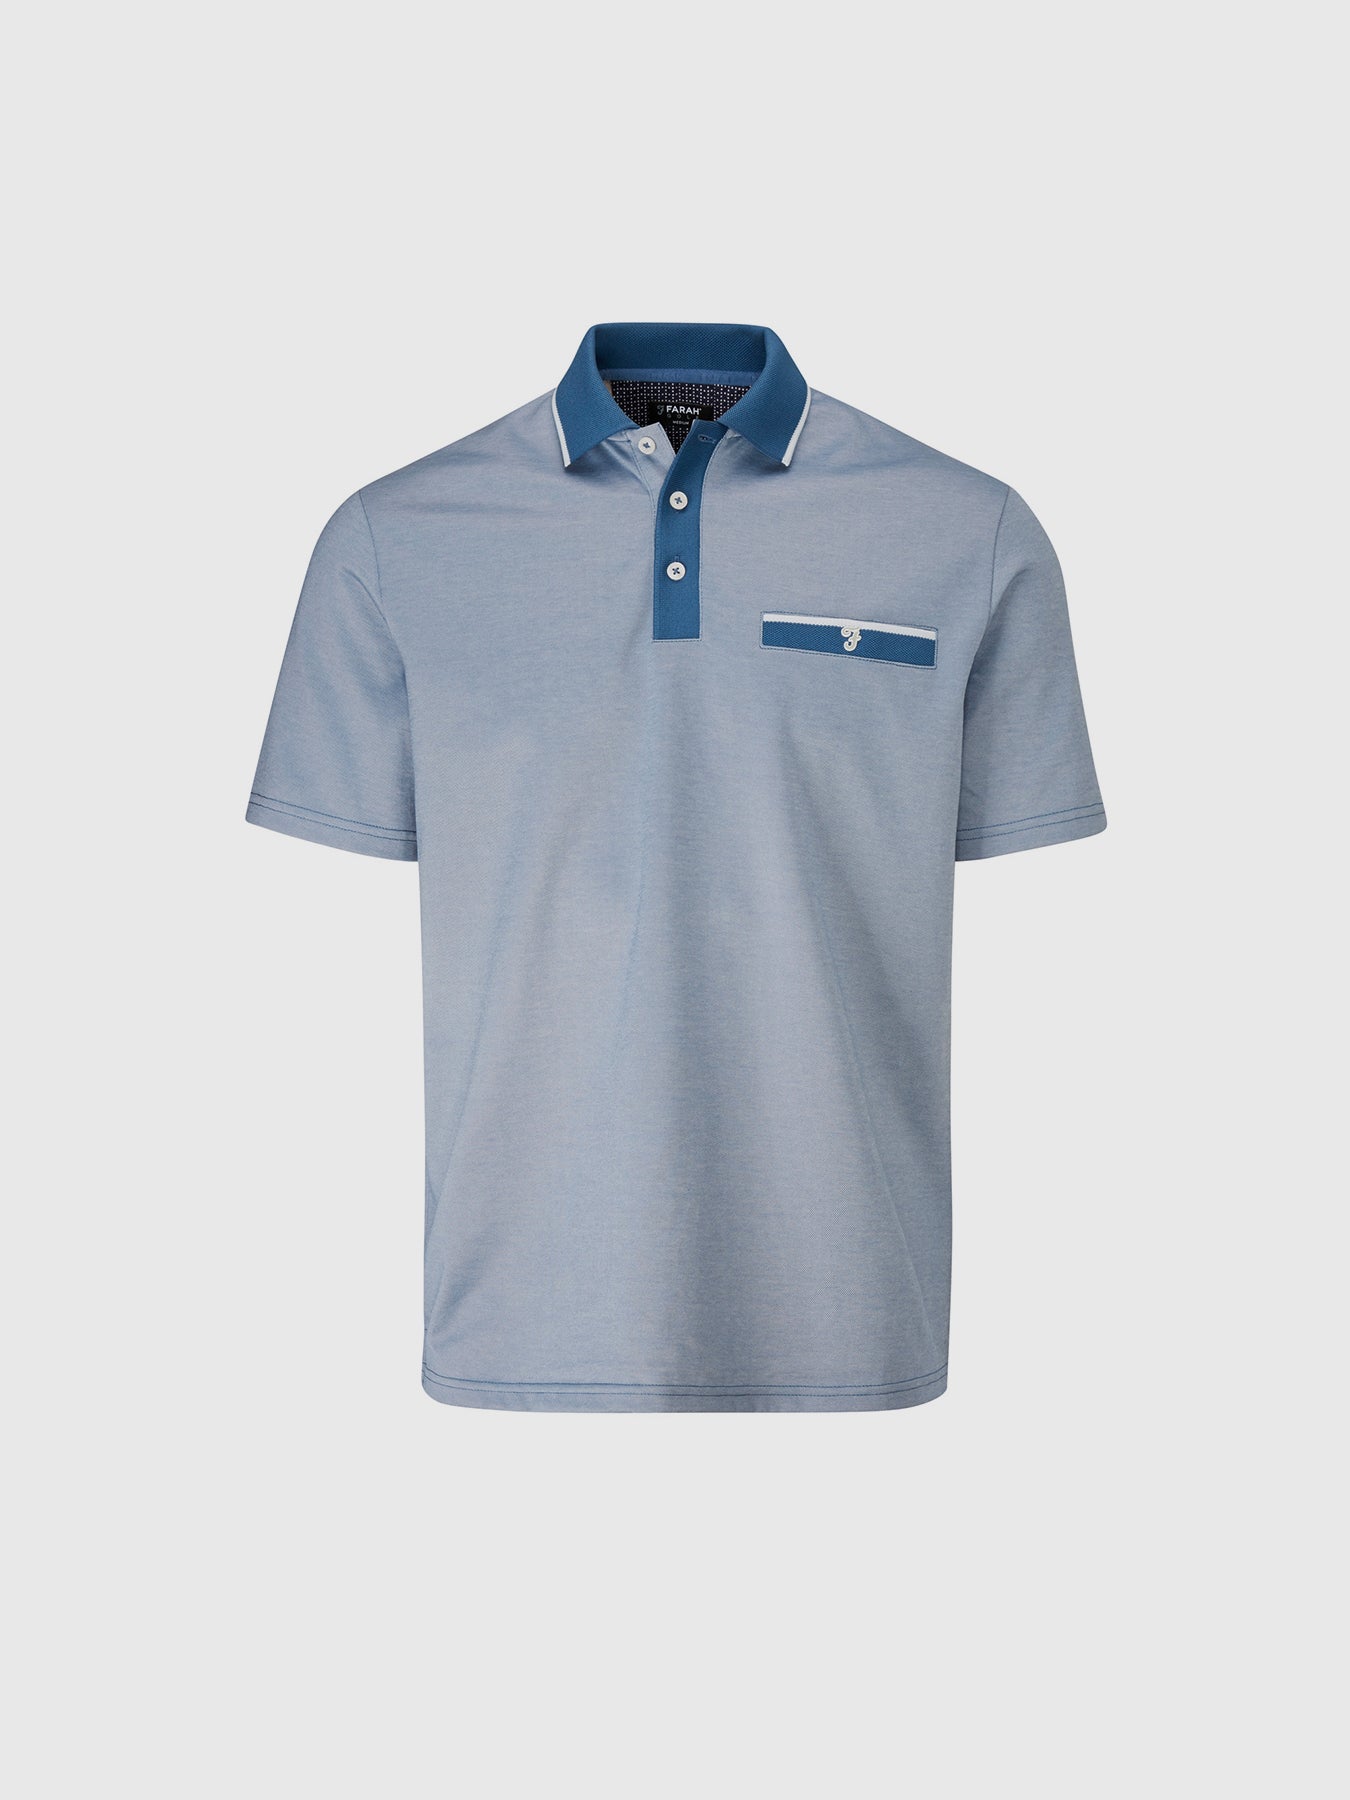 View Nelson Golf Polo Shirt In Dusky Blue information